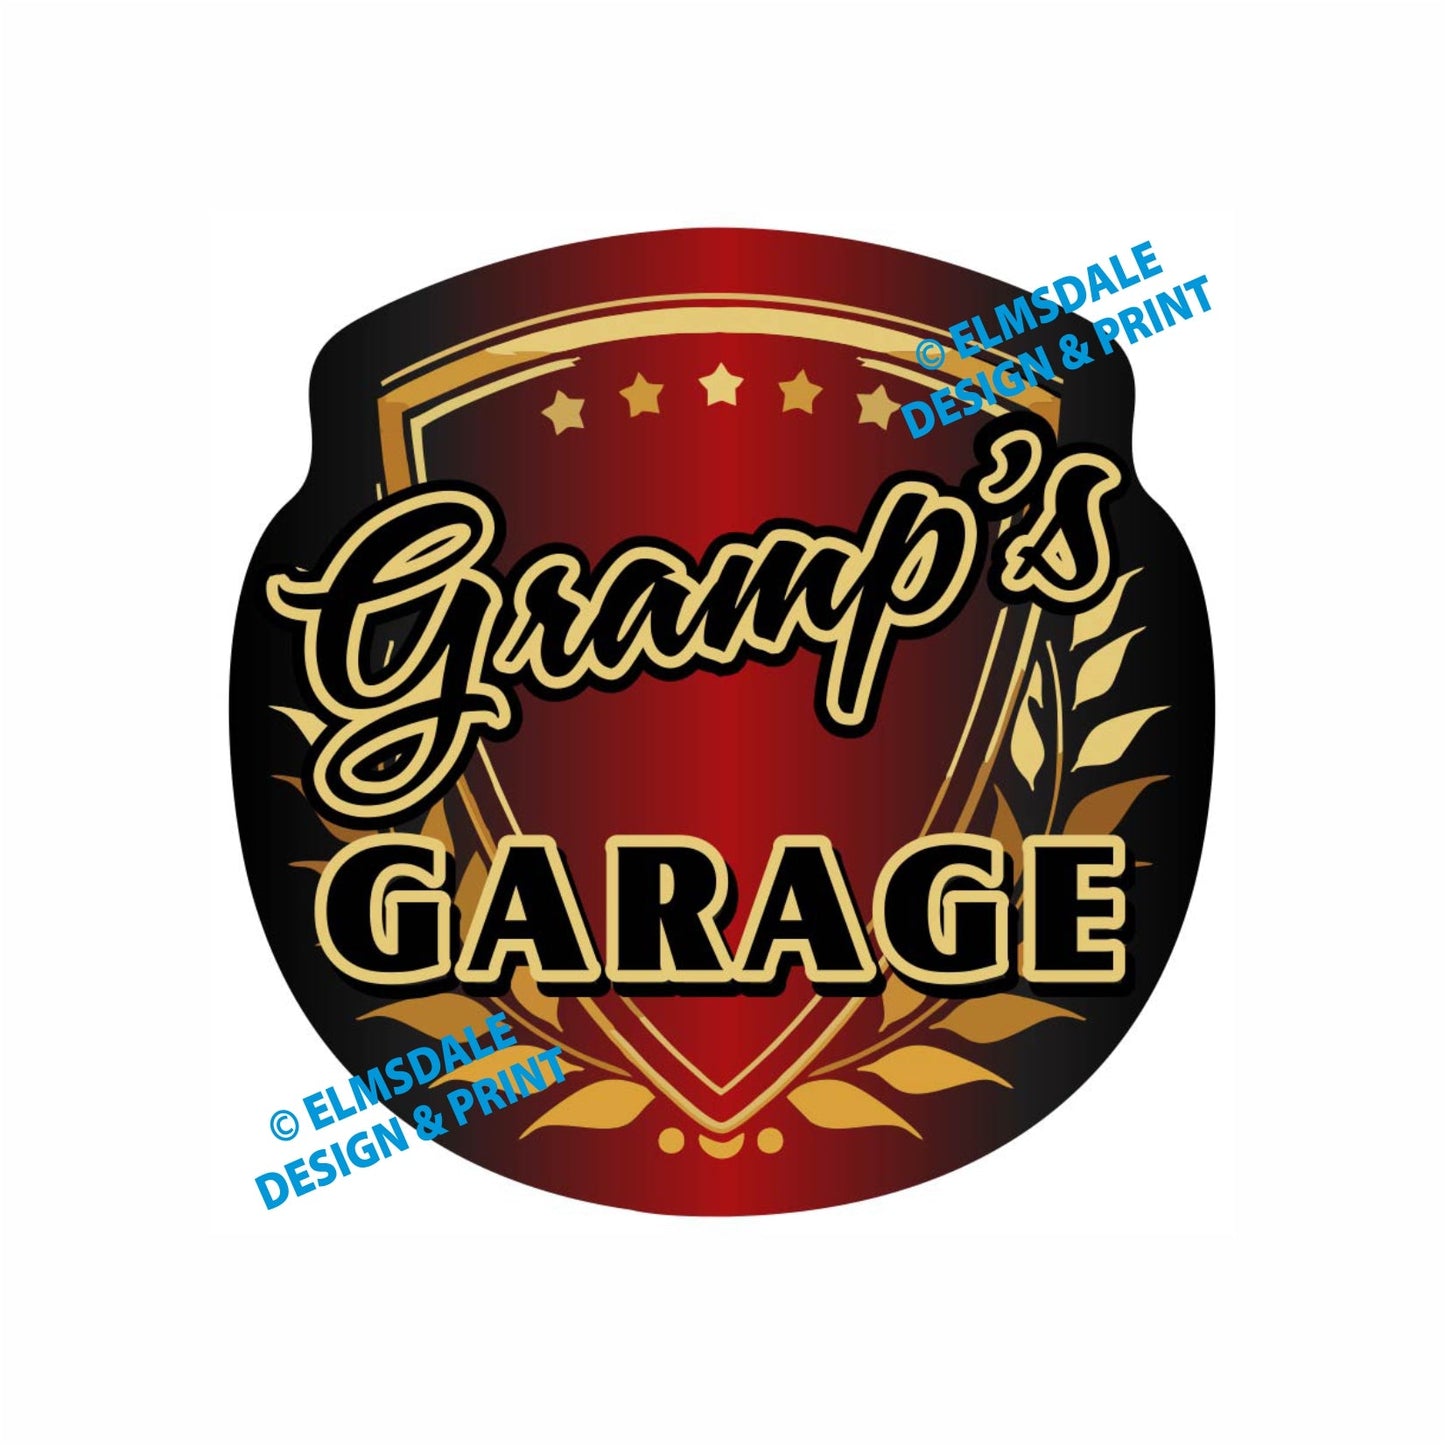 Gramps Garage - Decal / 9.25’ x 9.25’ / Gold & Red